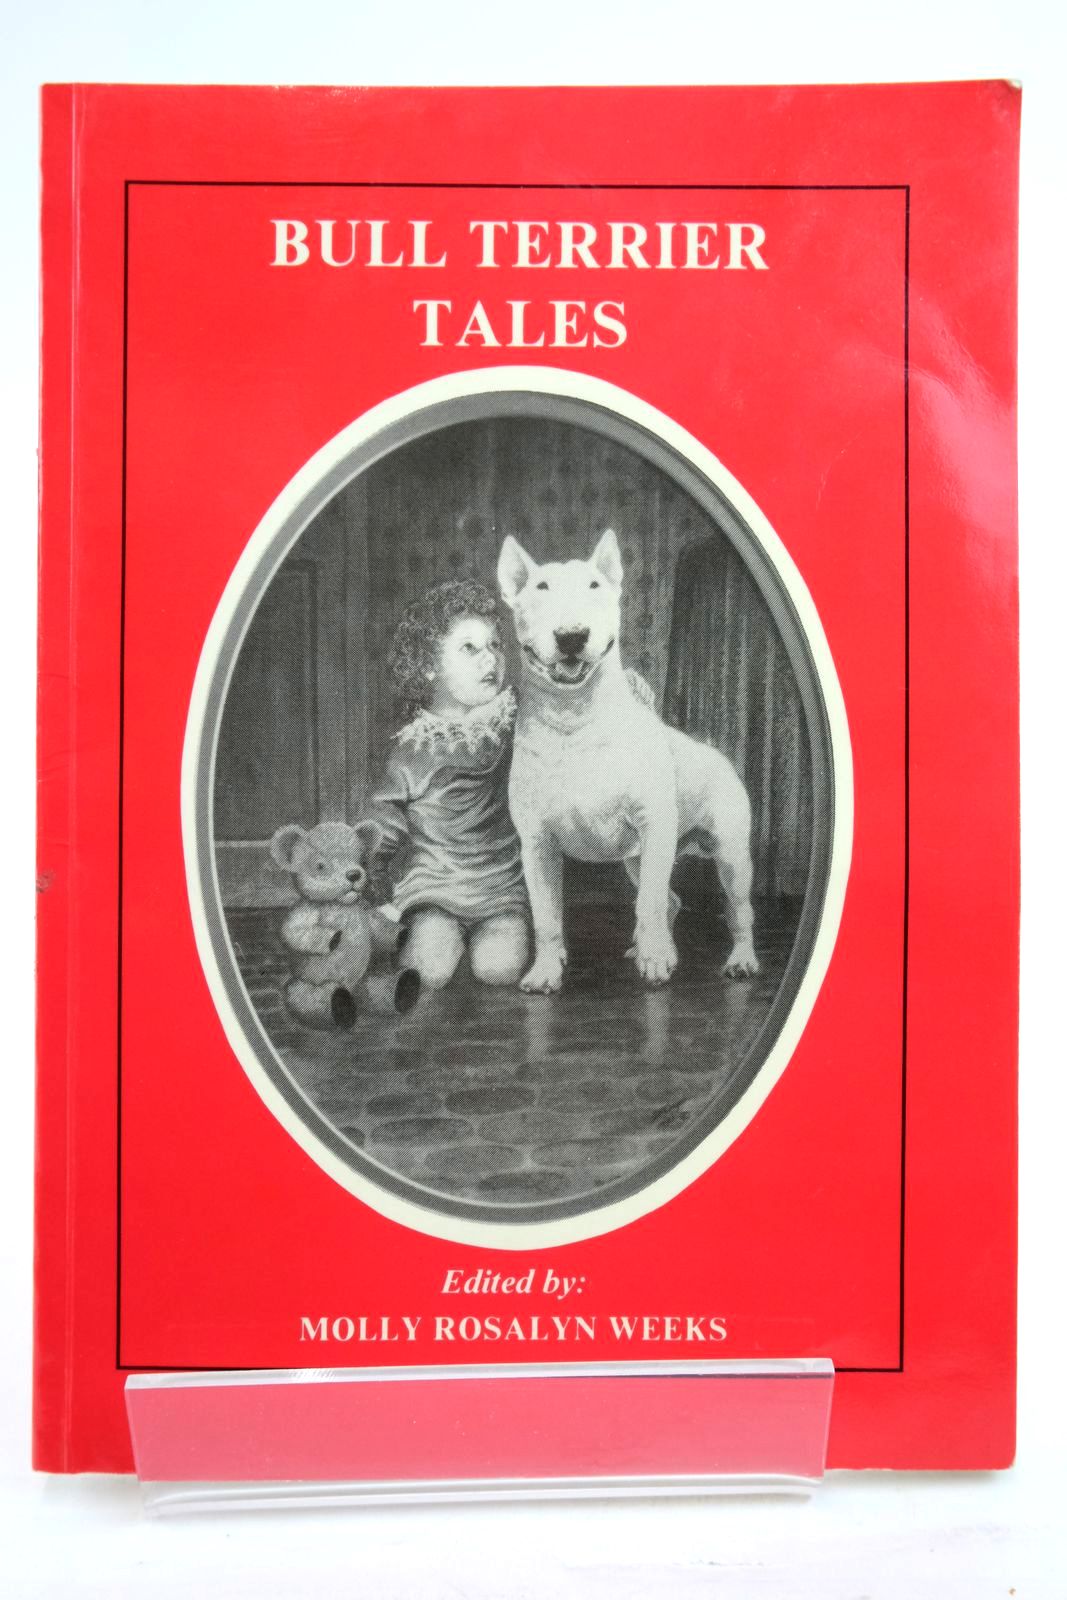 Photo of THE SECOND COLLECTION OF BULL TERRIER TALES written by Weeks, Molly Rosalyn published by Bernard Kaymar Ltd. (STOCK CODE: 2136931)  for sale by Stella & Rose's Books